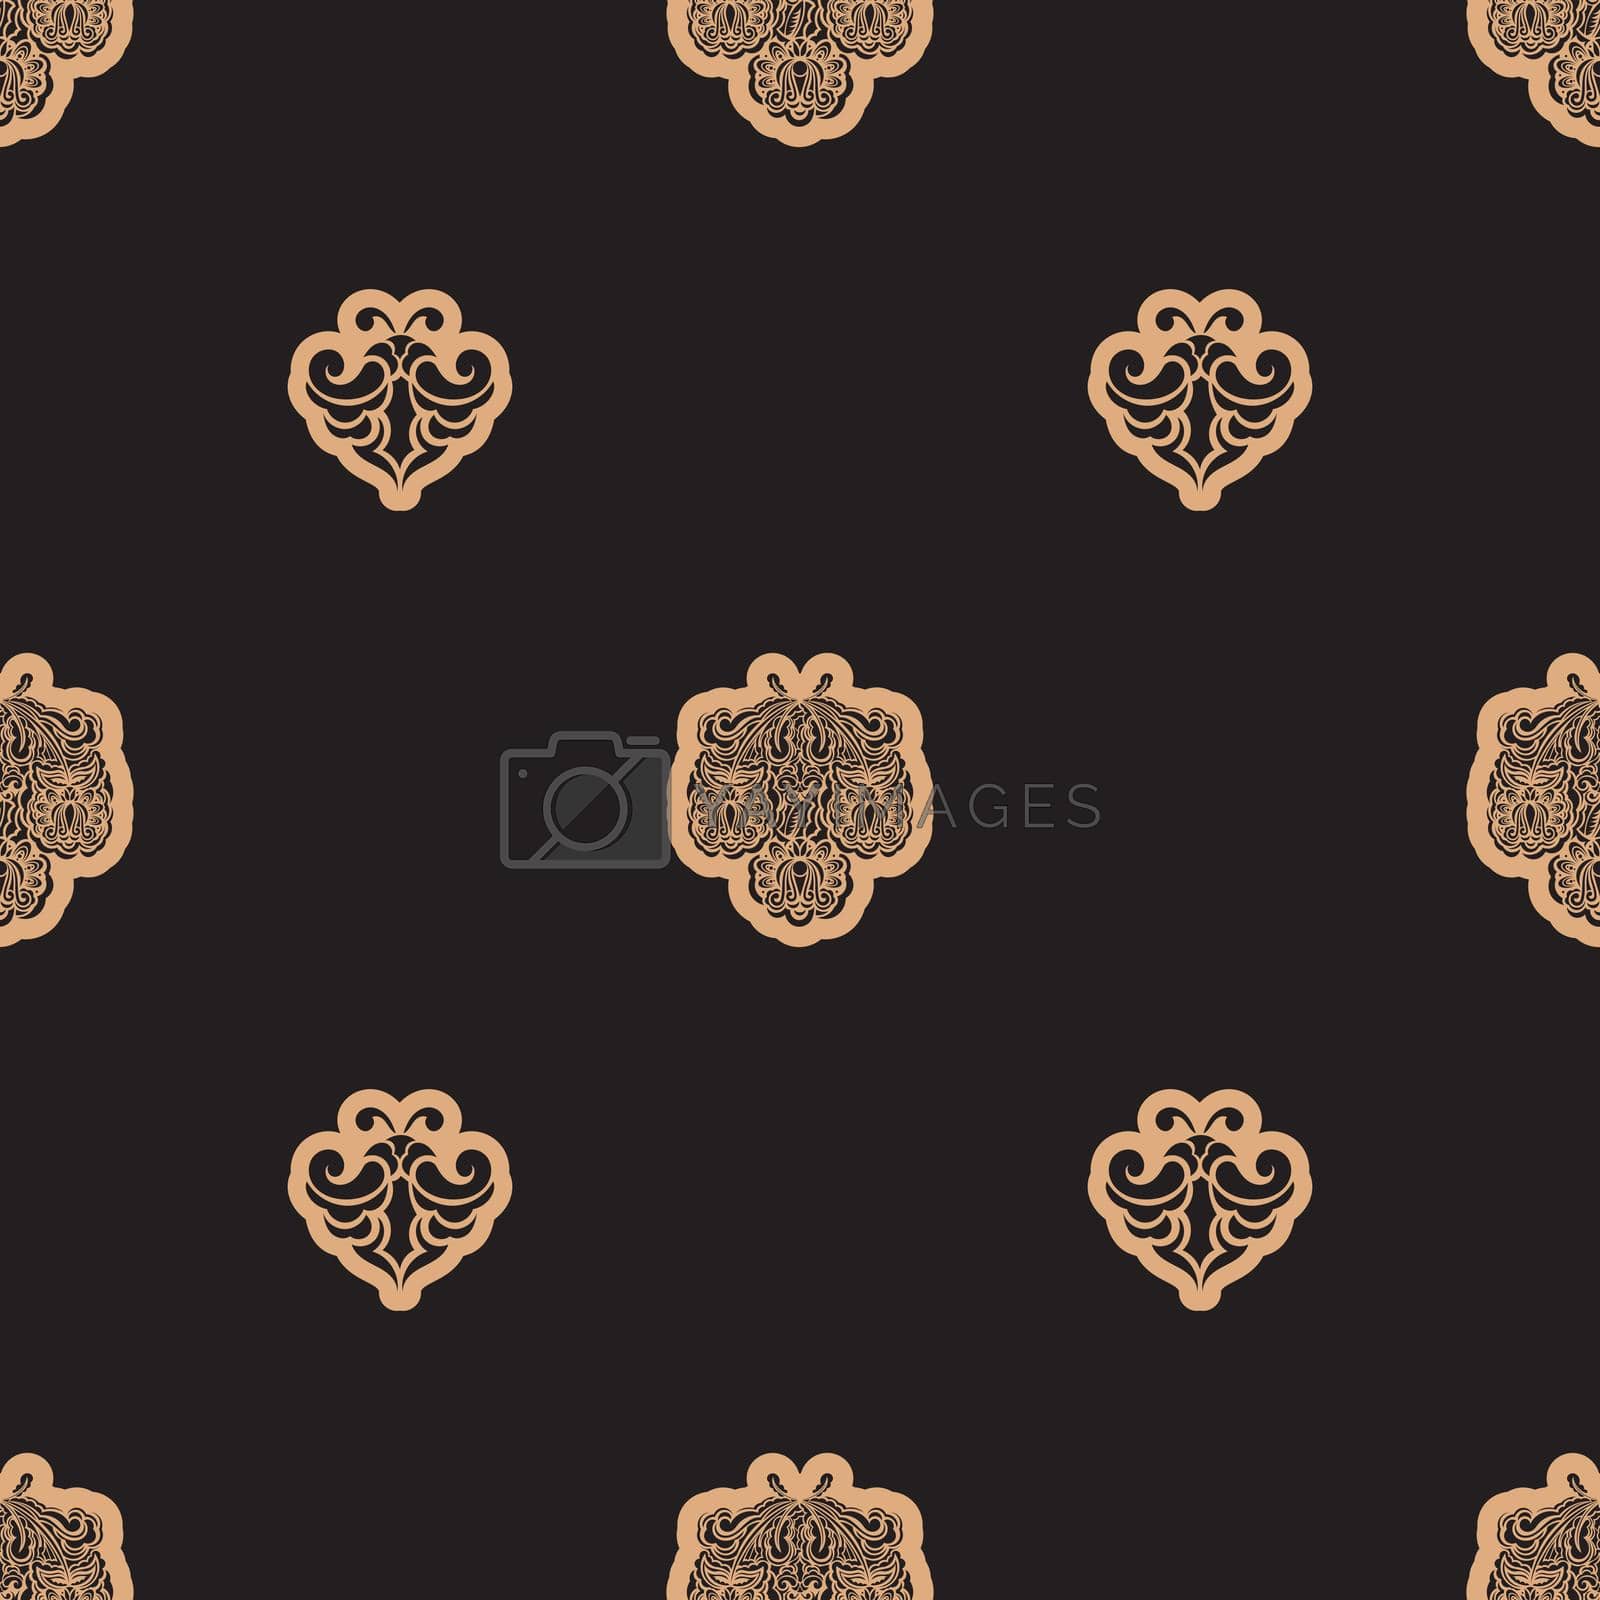 Seamless dark pattern with monograms in the Baroque style. Good for backgrounds and prints. Vector illustration.